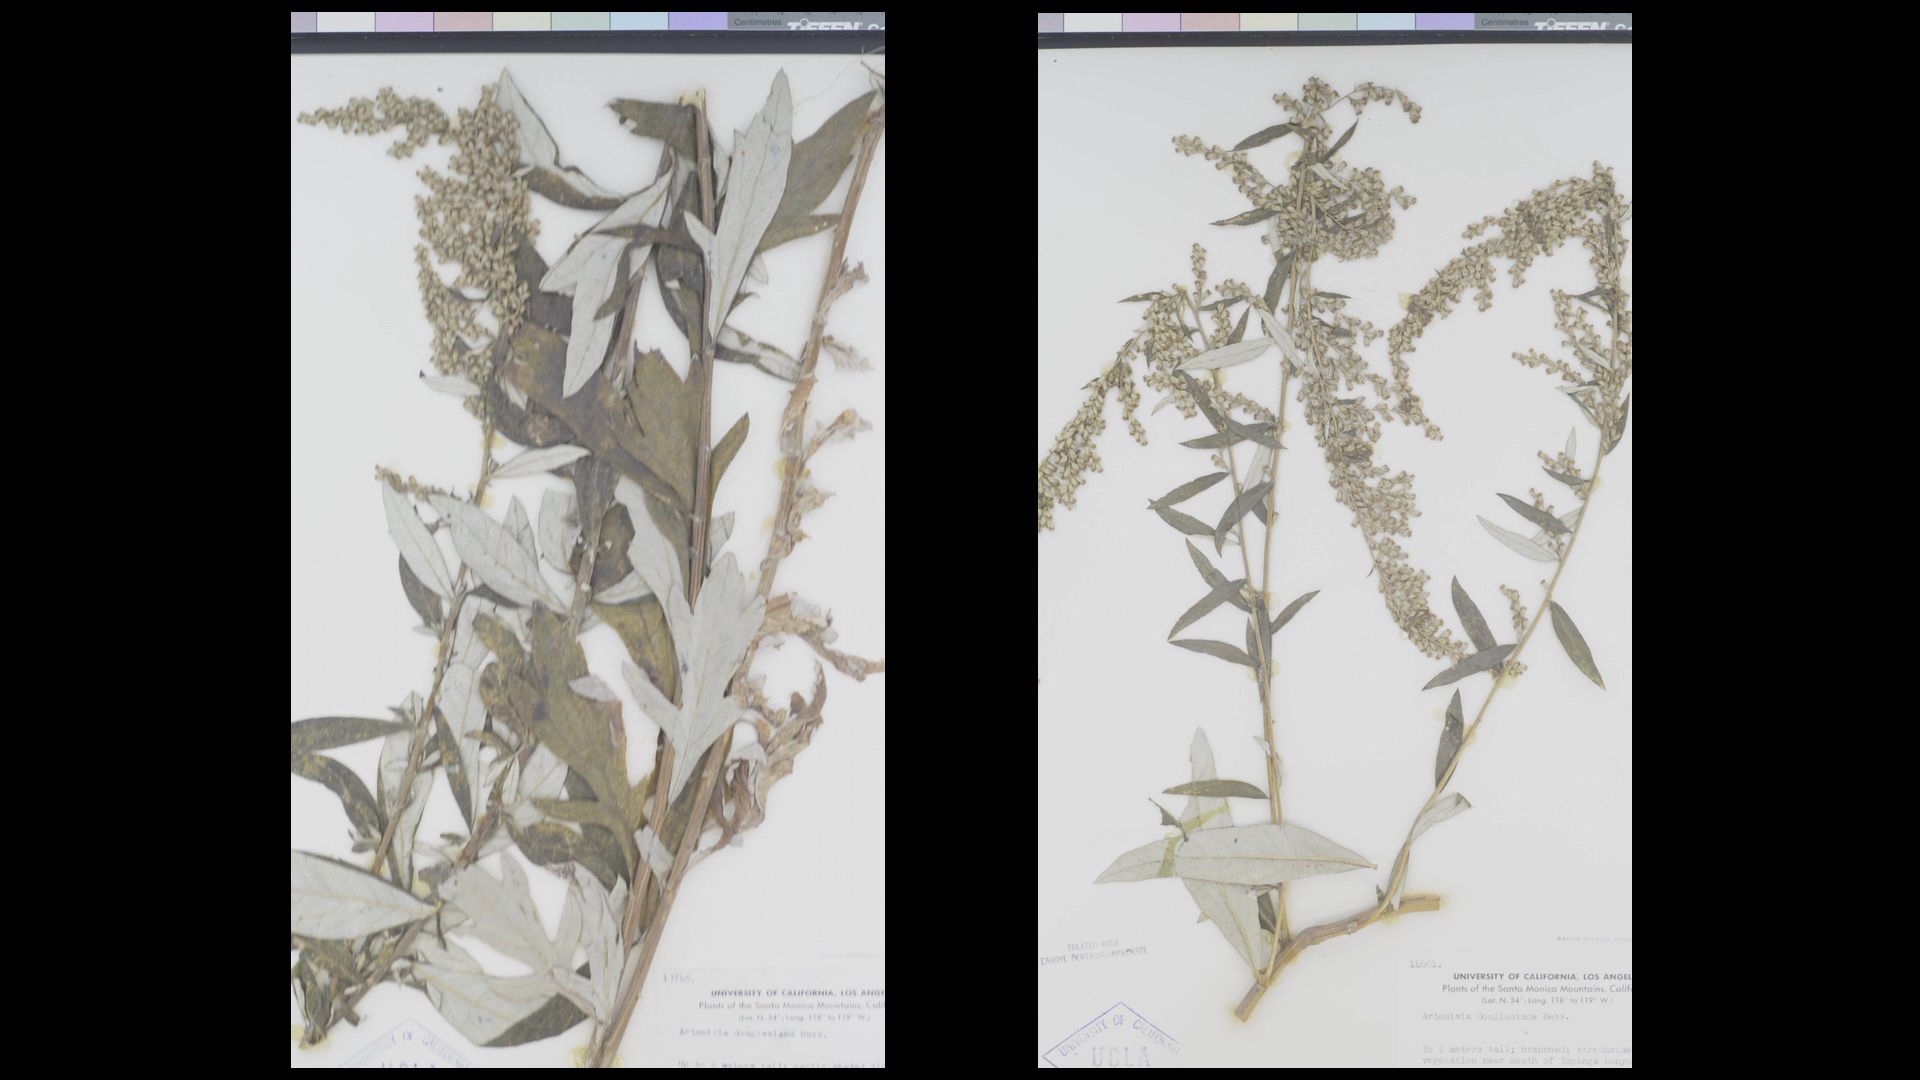 Two white images with pressed leaves, stems, and flowers on a black background.